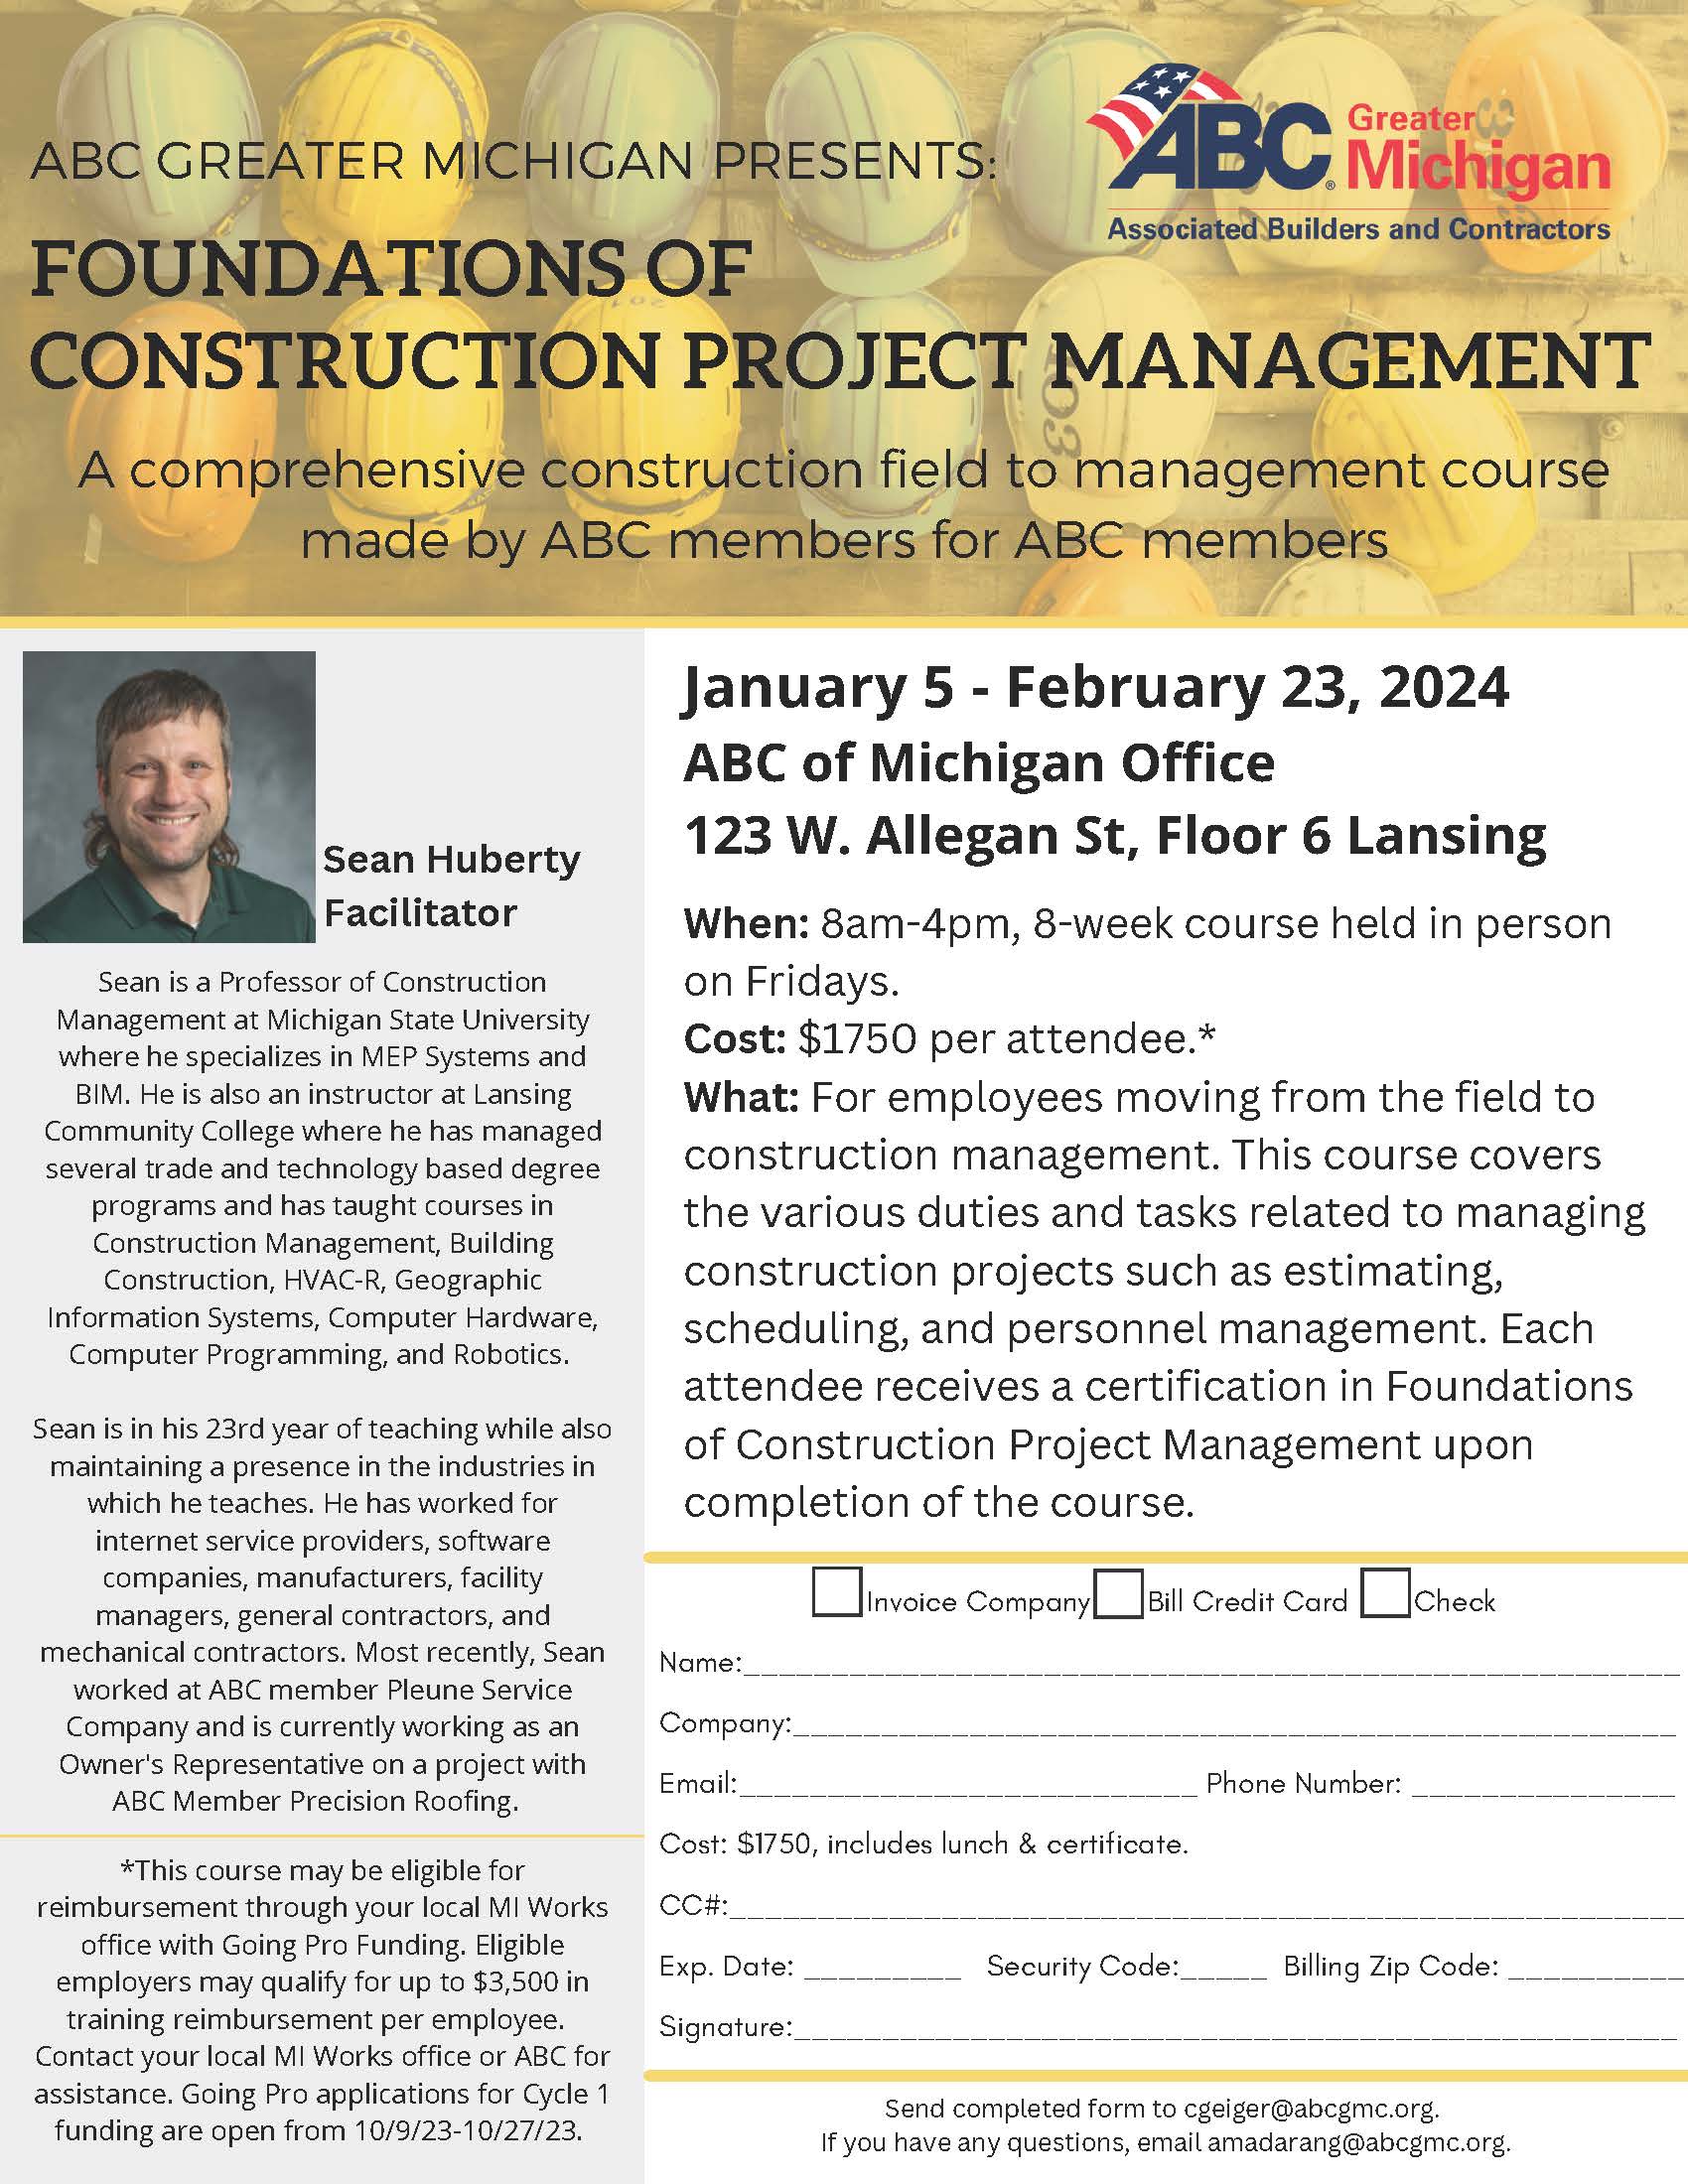 Foundations of Construction Project Management